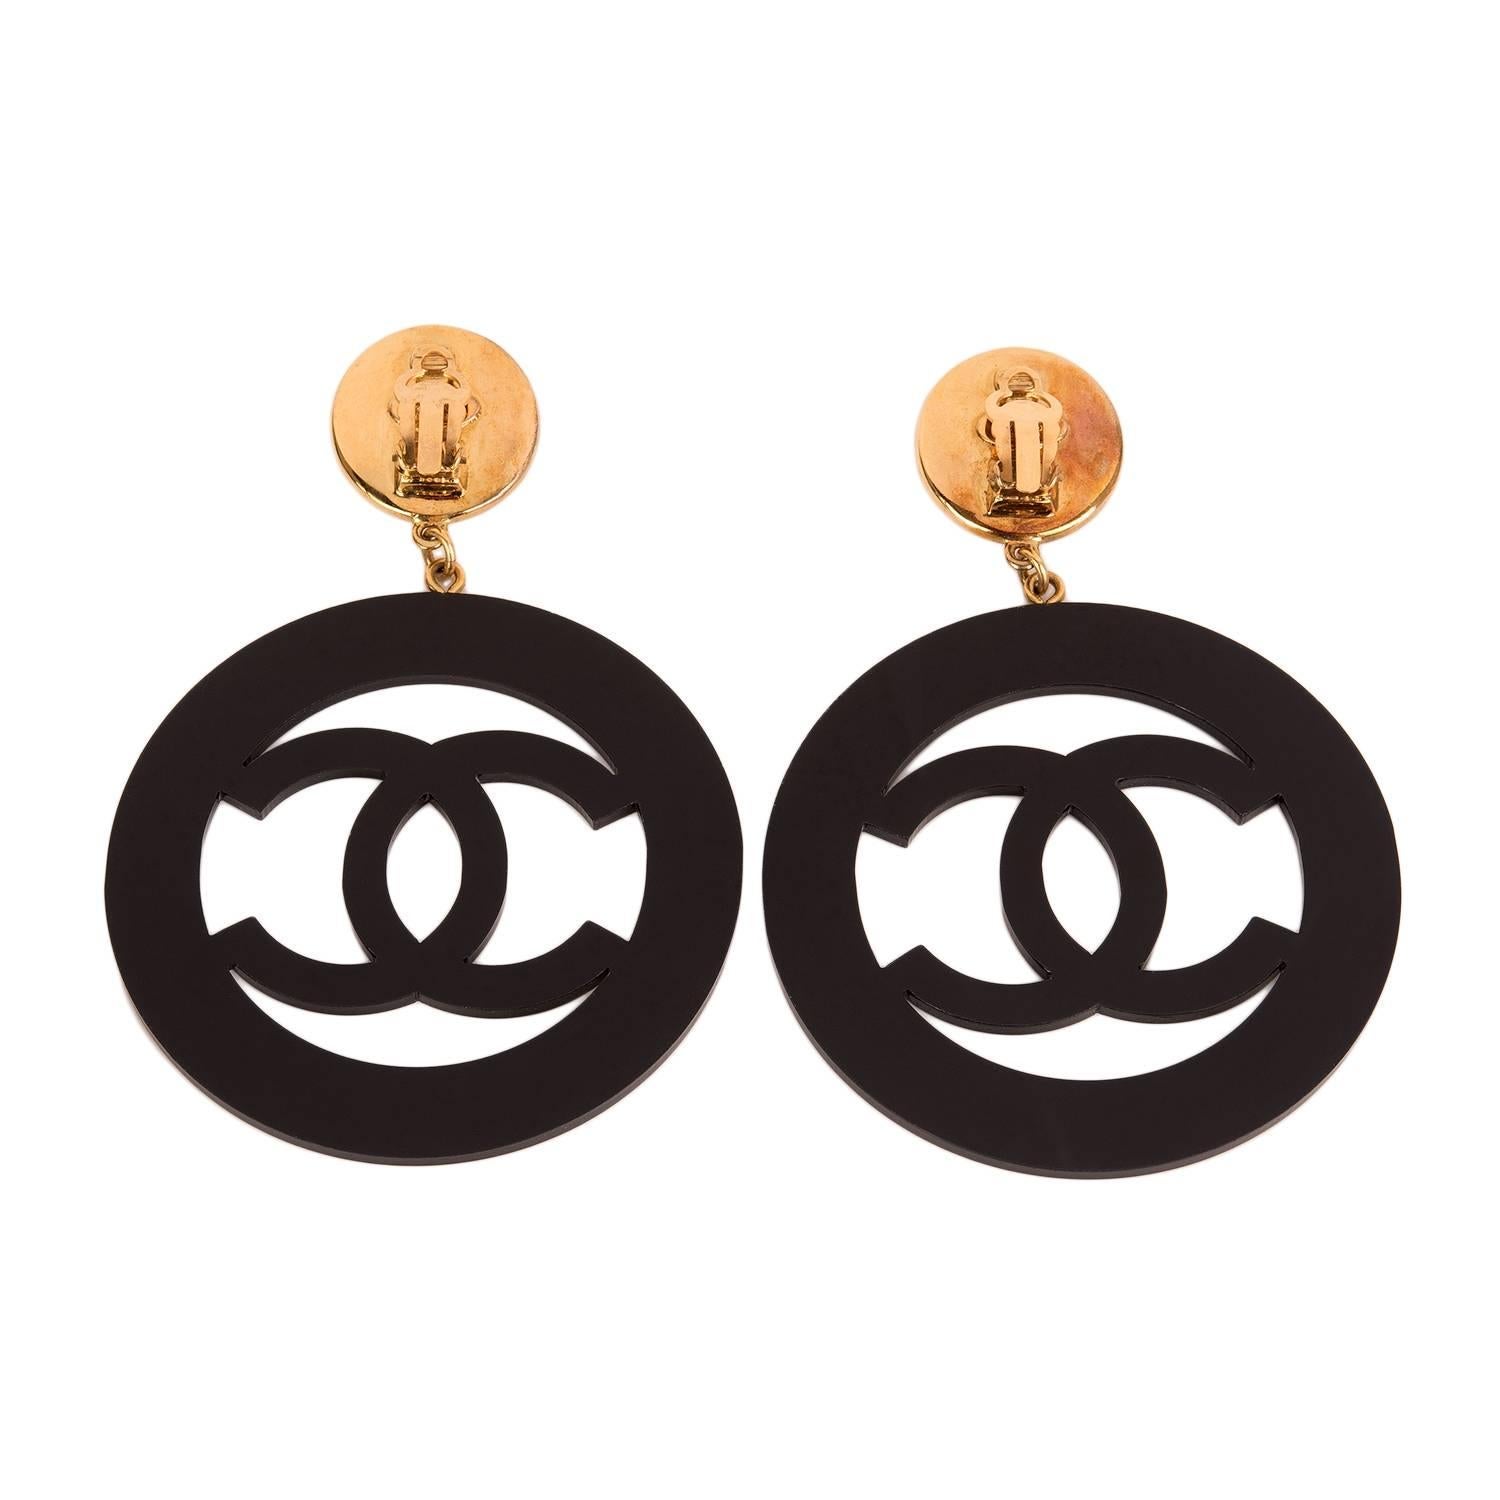 Chanel large vintage rare black resin CC-logo hoop earrings on round faux pearl earclips.

Collection: circa 1980's

Condition: Vintage; excellent

Accompaned By: Chanel box

Measurements: Earring length 4.5in; Hoop diameter: 3in.